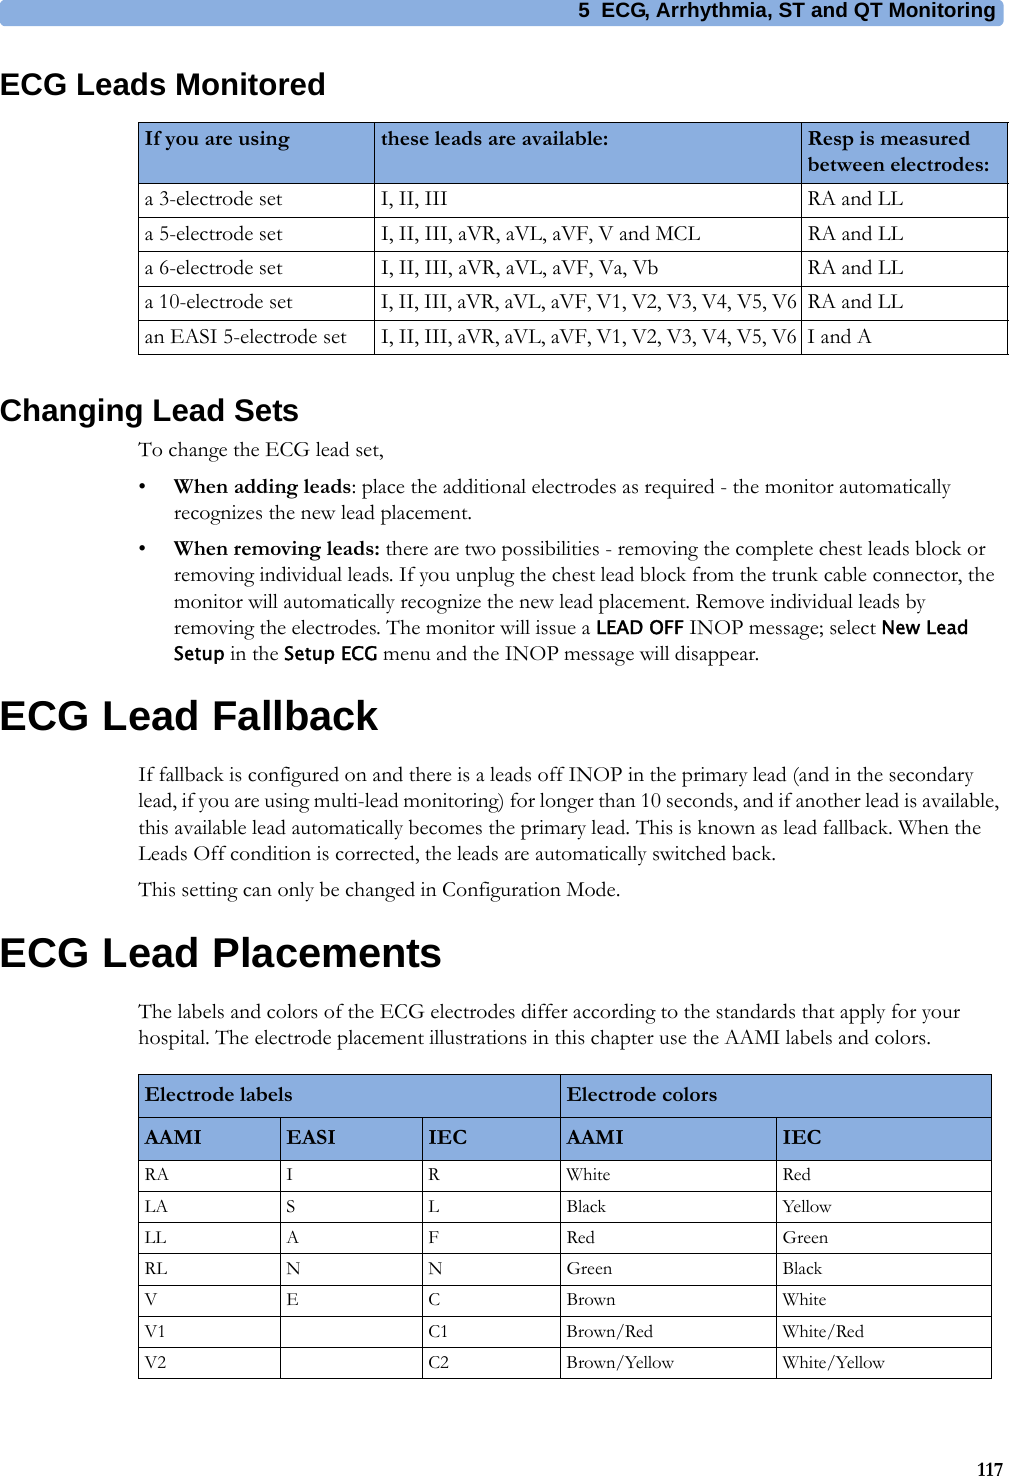 5 ECG, Arrhythmia, ST and QT Monitoring117ECG Leads MonitoredChanging Lead SetsTo change the ECG lead set,•When adding leads: place the additional electrodes as required - the monitor automatically recognizes the new lead placement.•When removing leads: there are two possibilities - removing the complete chest leads block or removing individual leads. If you unplug the chest lead block from the trunk cable connector, the monitor will automatically recognize the new lead placement. Remove individual leads by removing the electrodes. The monitor will issue a LEAD OFF INOP message; select New Lead Setup in the Setup ECG menu and the INOP message will disappear.ECG Lead FallbackIf fallback is configured on and there is a leads off INOP in the primary lead (and in the secondary lead, if you are using multi-lead monitoring) for longer than 10 seconds, and if another lead is available, this available lead automatically becomes the primary lead. This is known as lead fallback. When the Leads Off condition is corrected, the leads are automatically switched back.This setting can only be changed in Configuration Mode.ECG Lead PlacementsThe labels and colors of the ECG electrodes differ according to the standards that apply for your hospital. The electrode placement illustrations in this chapter use the AAMI labels and colors.If you are using these leads are available: Resp is measured between electrodes:a 3-electrode set I, II, III RA and LLa 5-electrode set I, II, III, aVR, aVL, aVF, V and MCL RA and LLa 6-electrode set I, II, III, aVR, aVL, aVF, Va, Vb RA and LLa 10-electrode set I, II, III, aVR, aVL, aVF, V1, V2, V3, V4, V5, V6 RA and LLan EASI 5-electrode set I, II, III, aVR, aVL, aVF, V1, V2, V3, V4, V5, V6 I and AElectrode labels Electrode colorsAAMI EASI IEC AAMI IECRA I R White RedLA S L Black YellowLL A F Red GreenRL N N Green BlackVECBrown WhiteV1 C1 Brown/Red White/RedV2 C2 Brown/Yellow White/Yellow